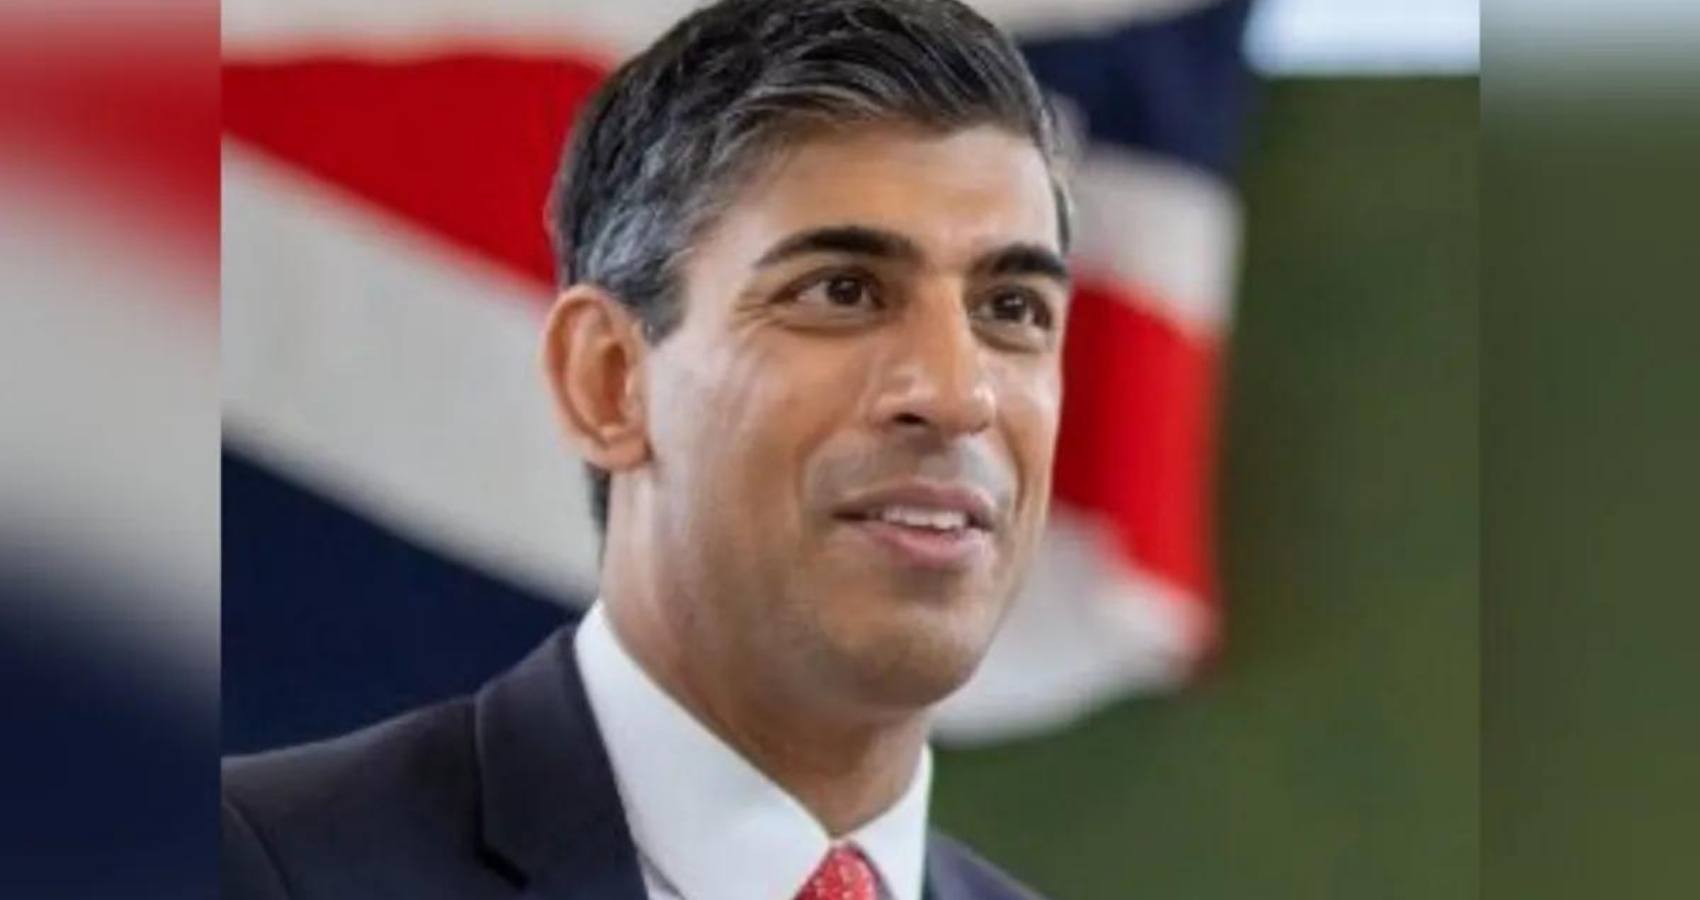 Rishi Sunak, A Front Runner To Be The PM Of UK